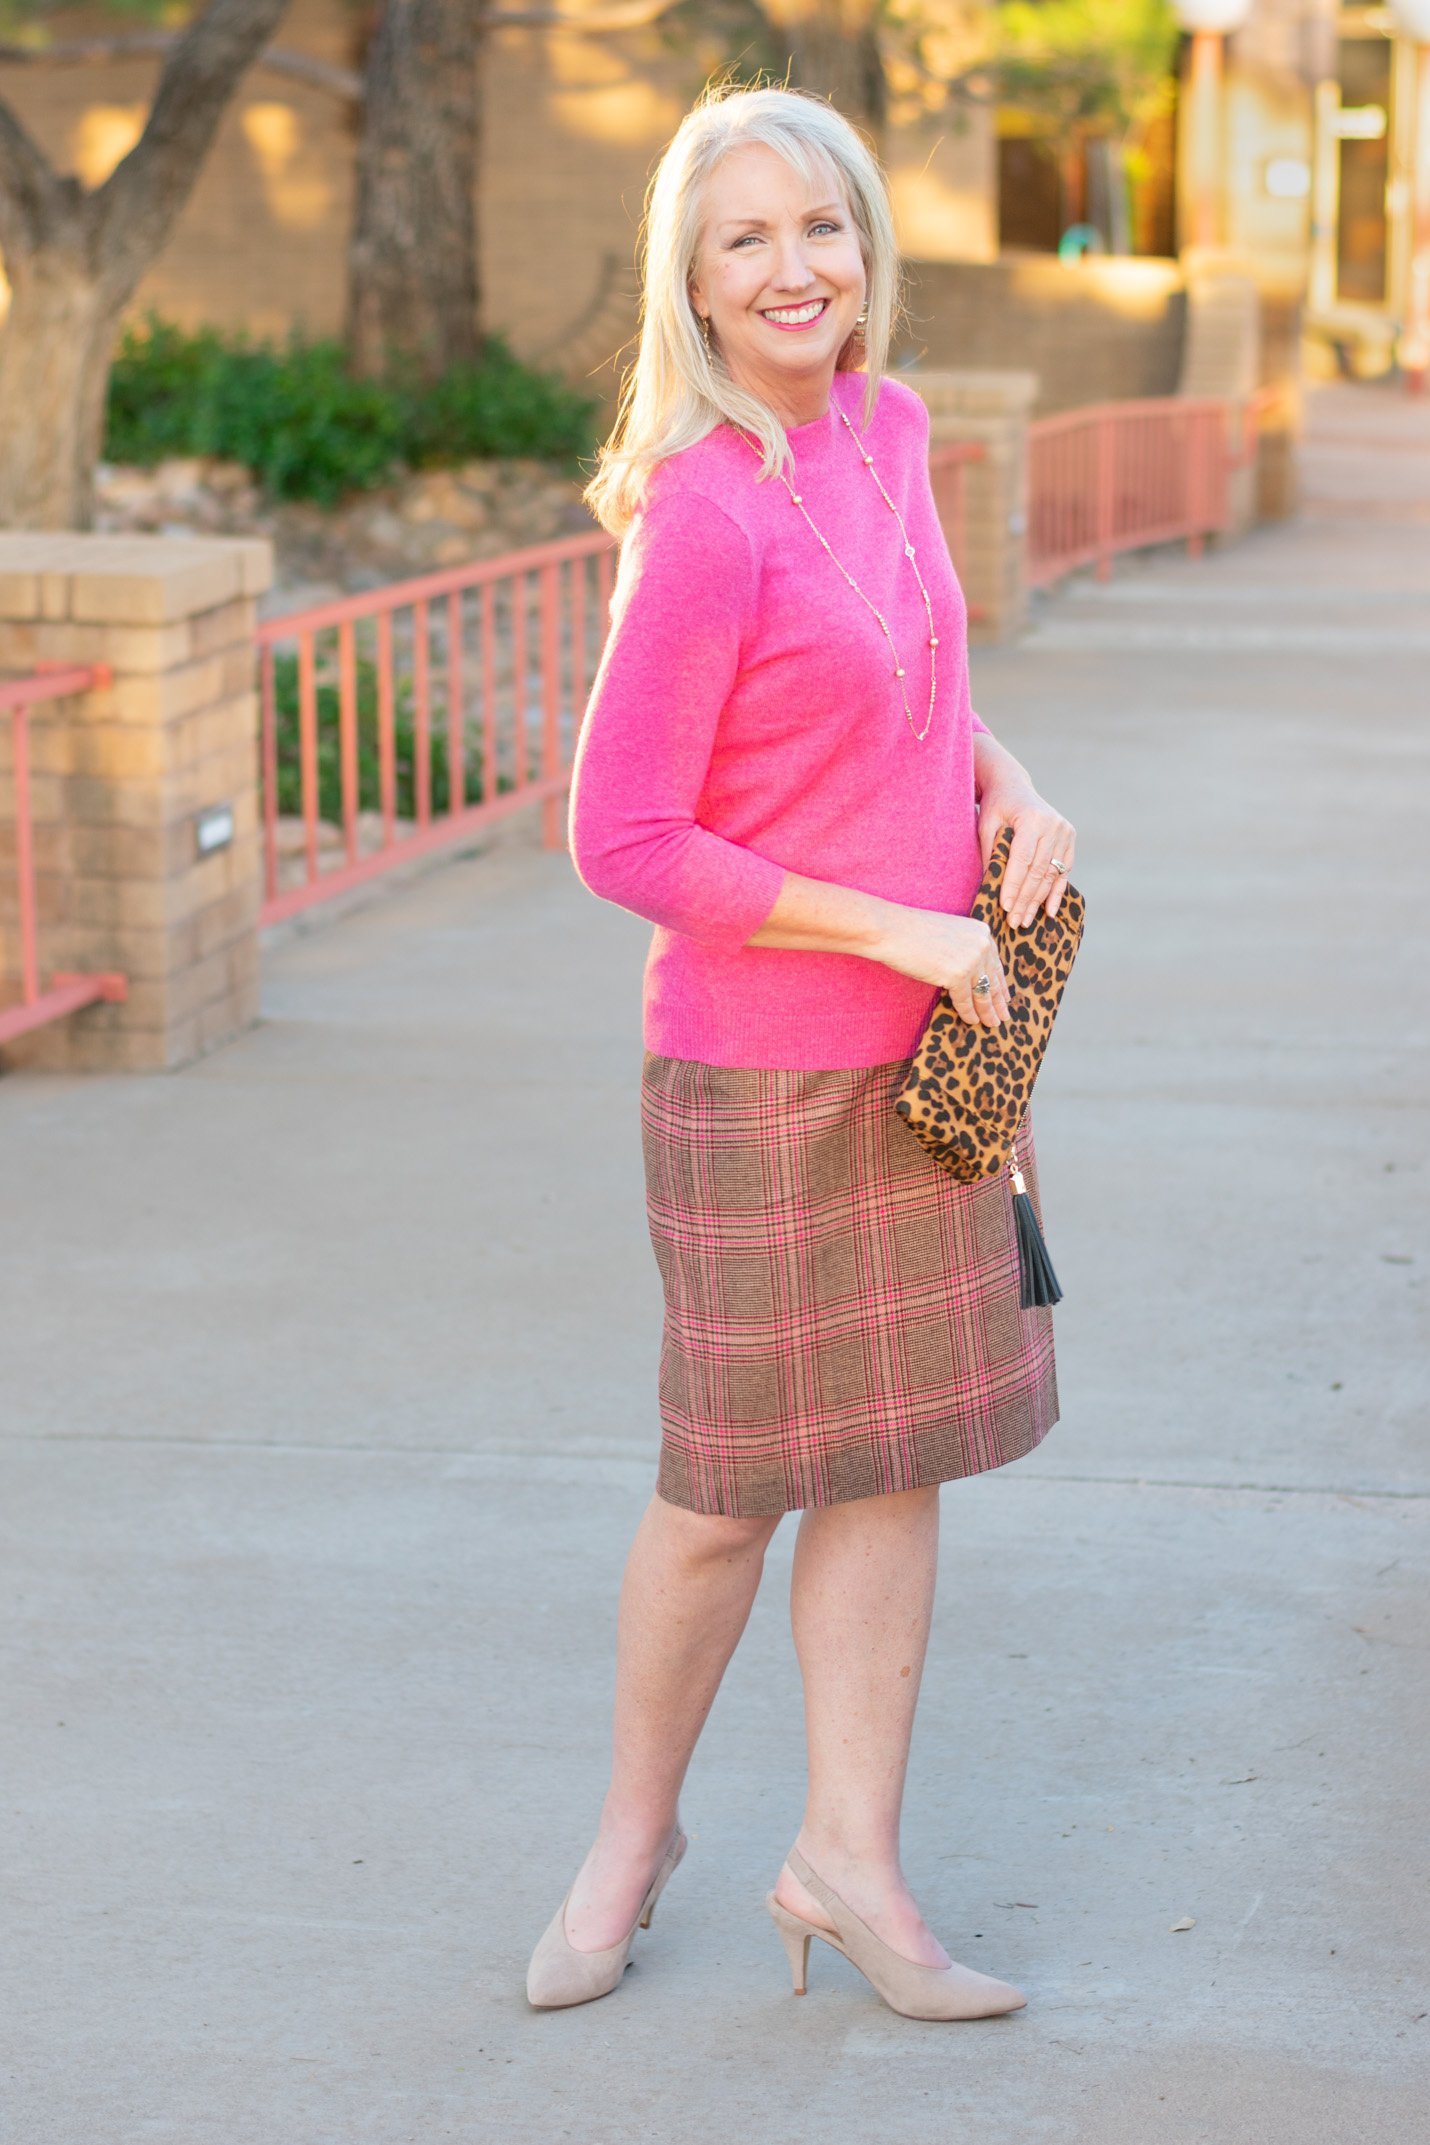 Skirt and Cashmere Sweater in Soft Shades of Fall